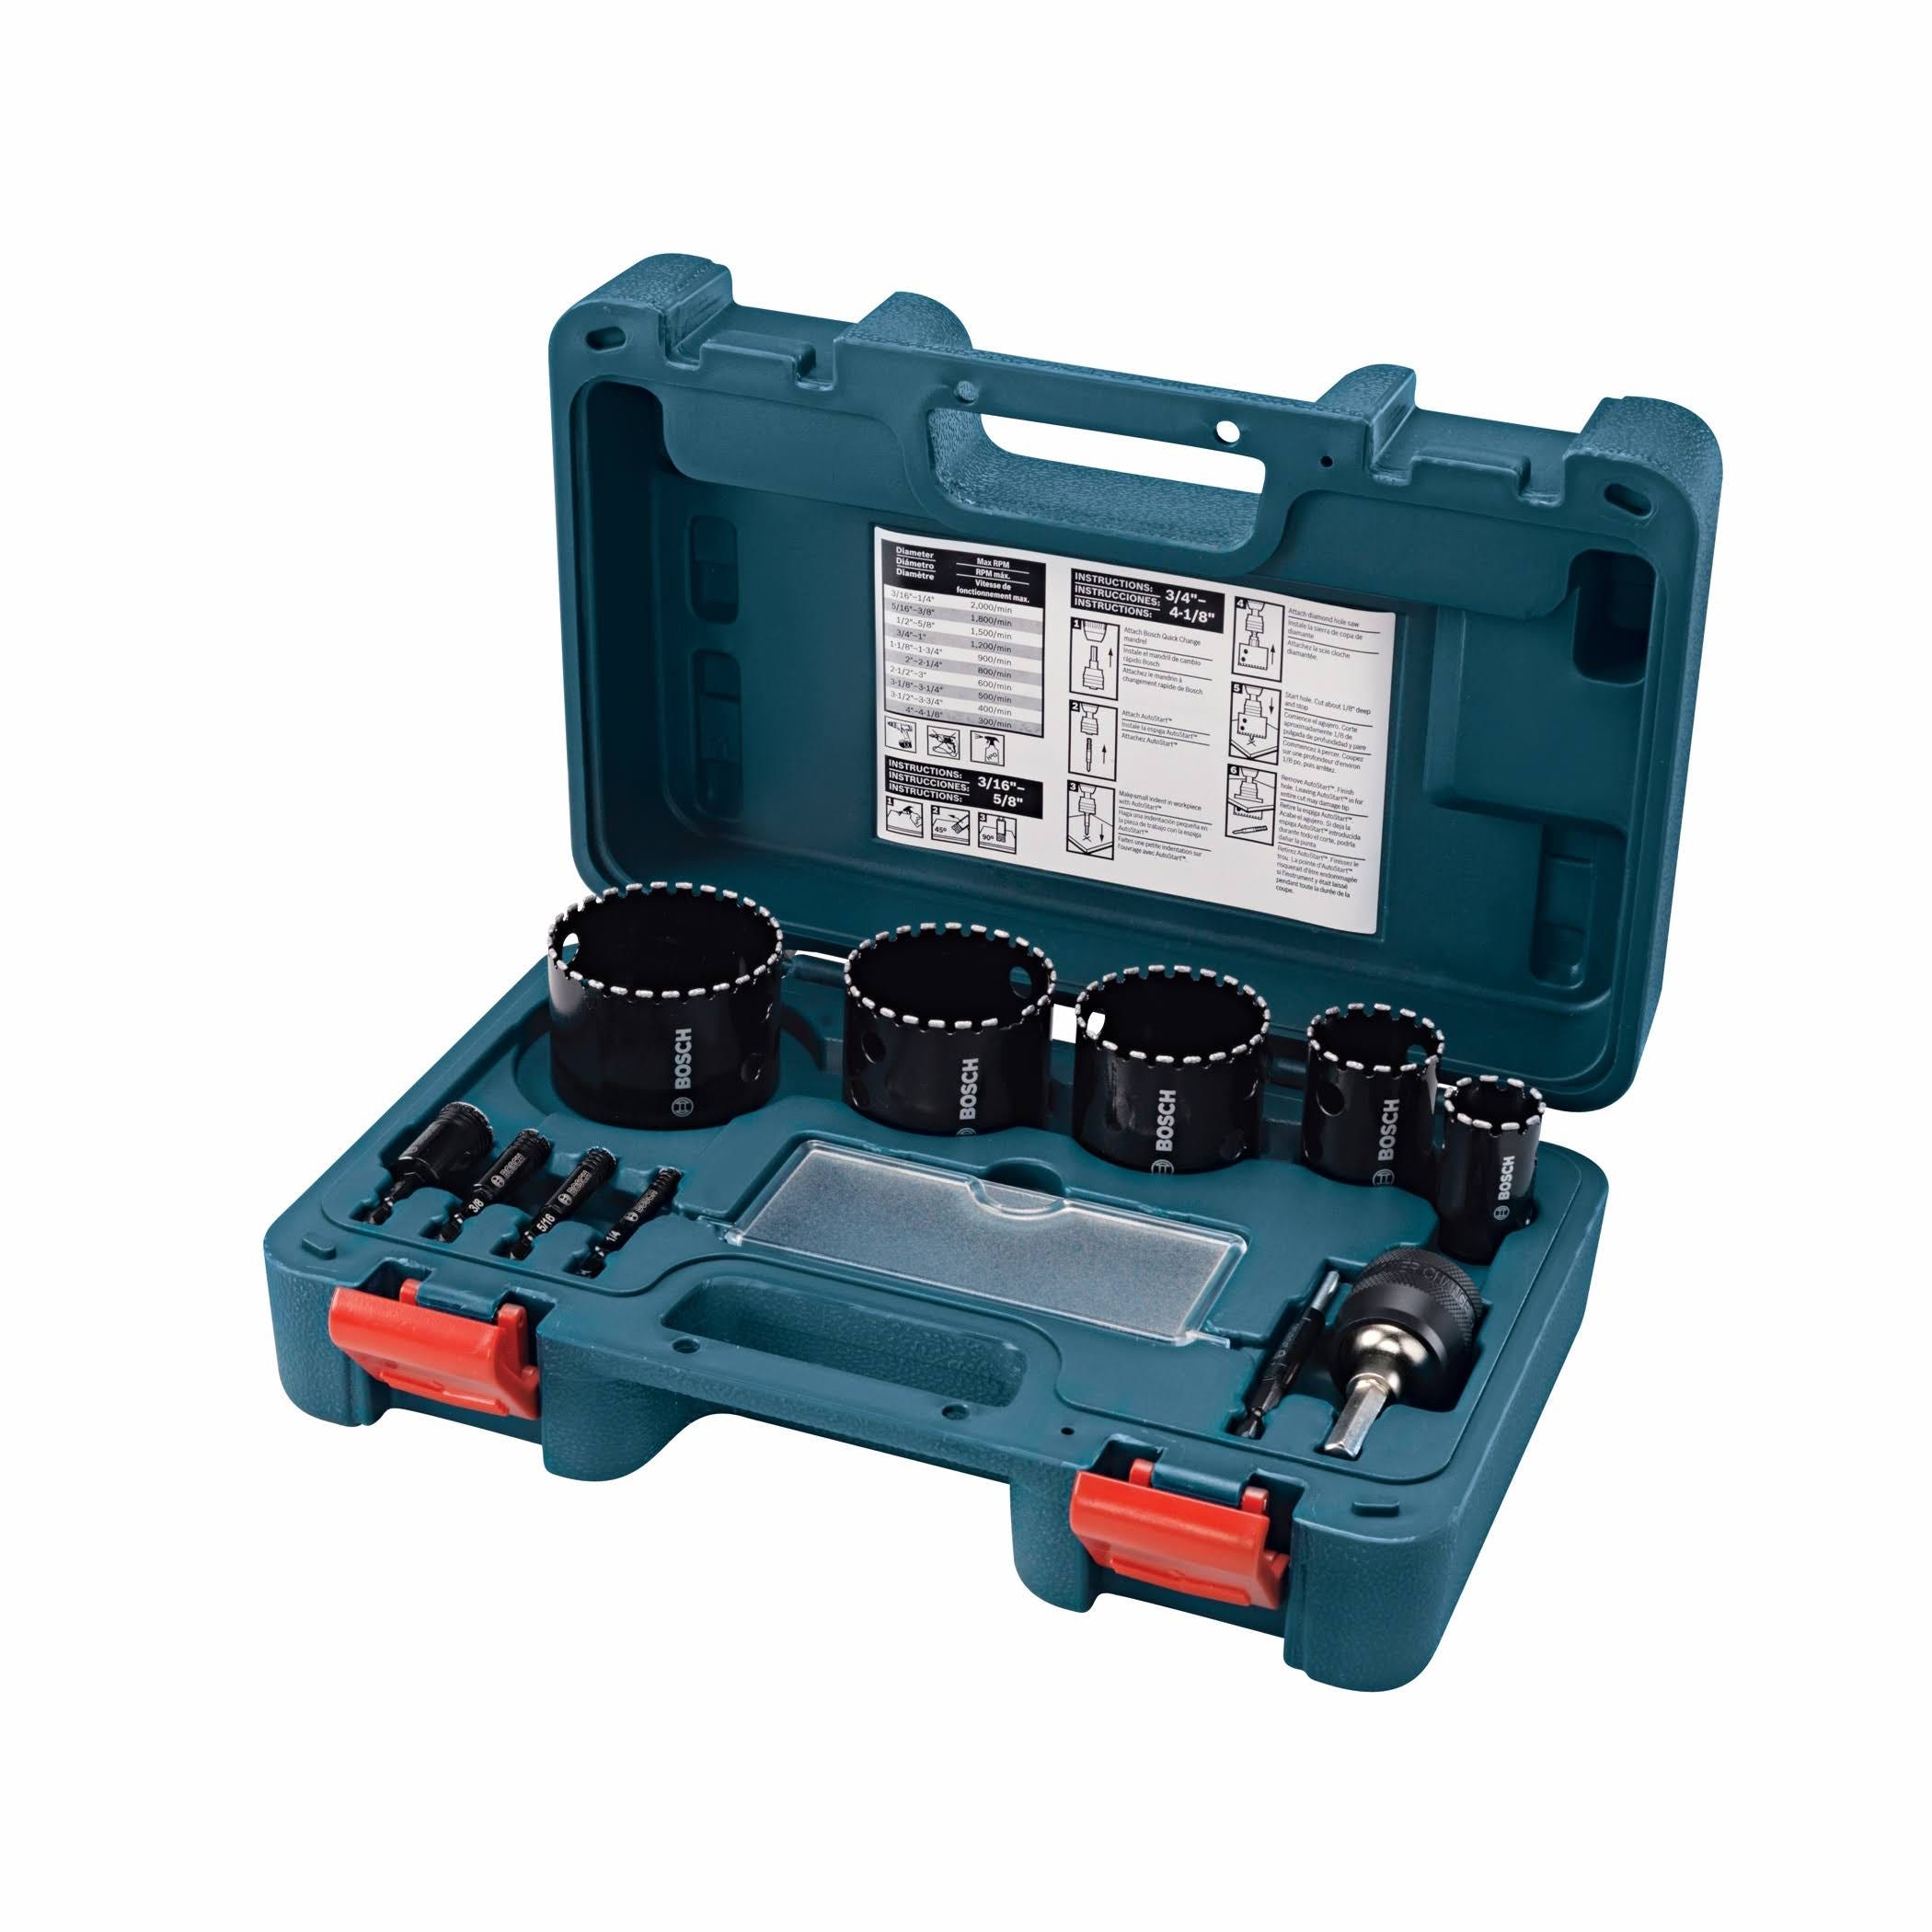 Bosch 11-Piece Diamond Hole Saw Set: Perfect for Granite and Tile Surfaces | Image